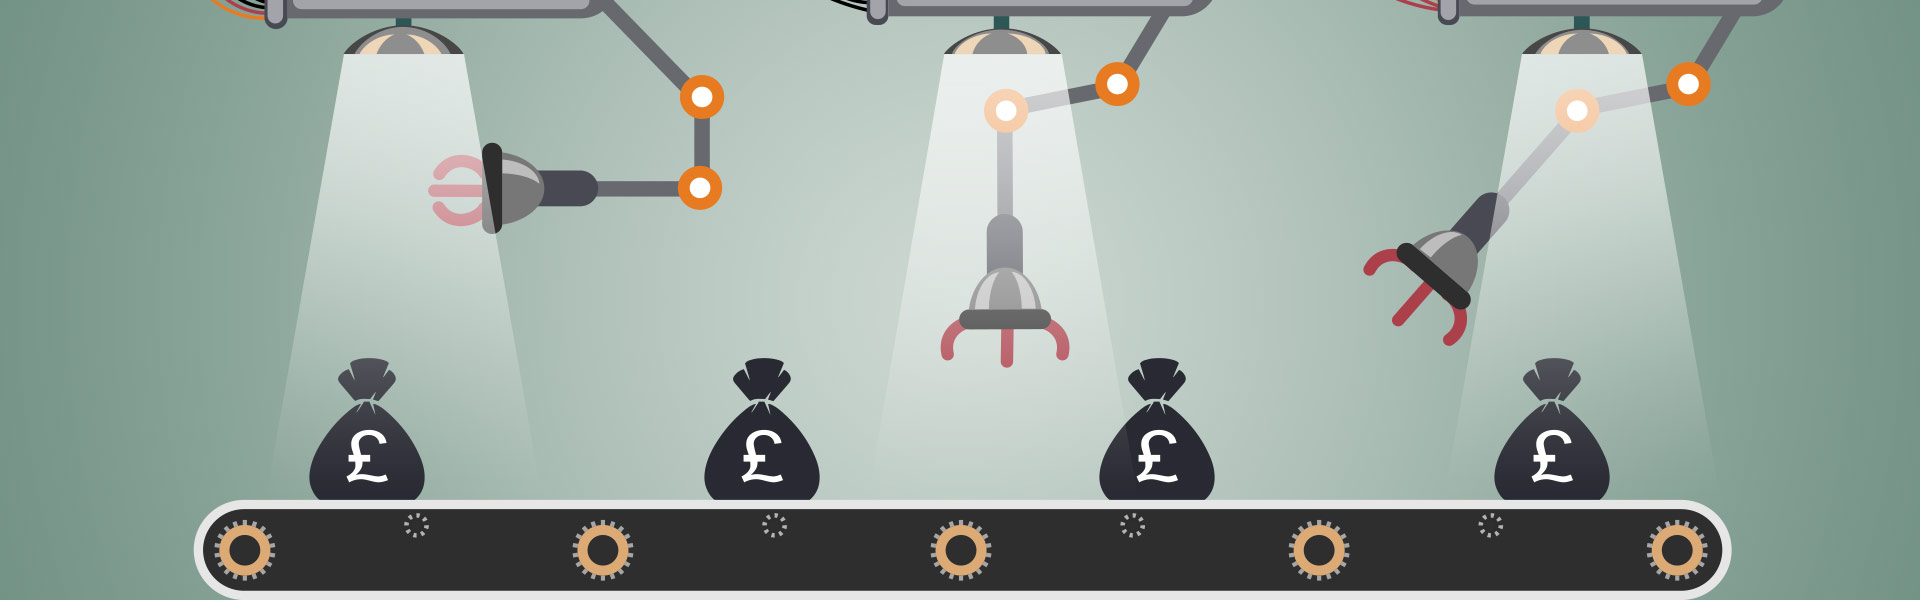 Impact of cost pressures on the manufacturing workforce